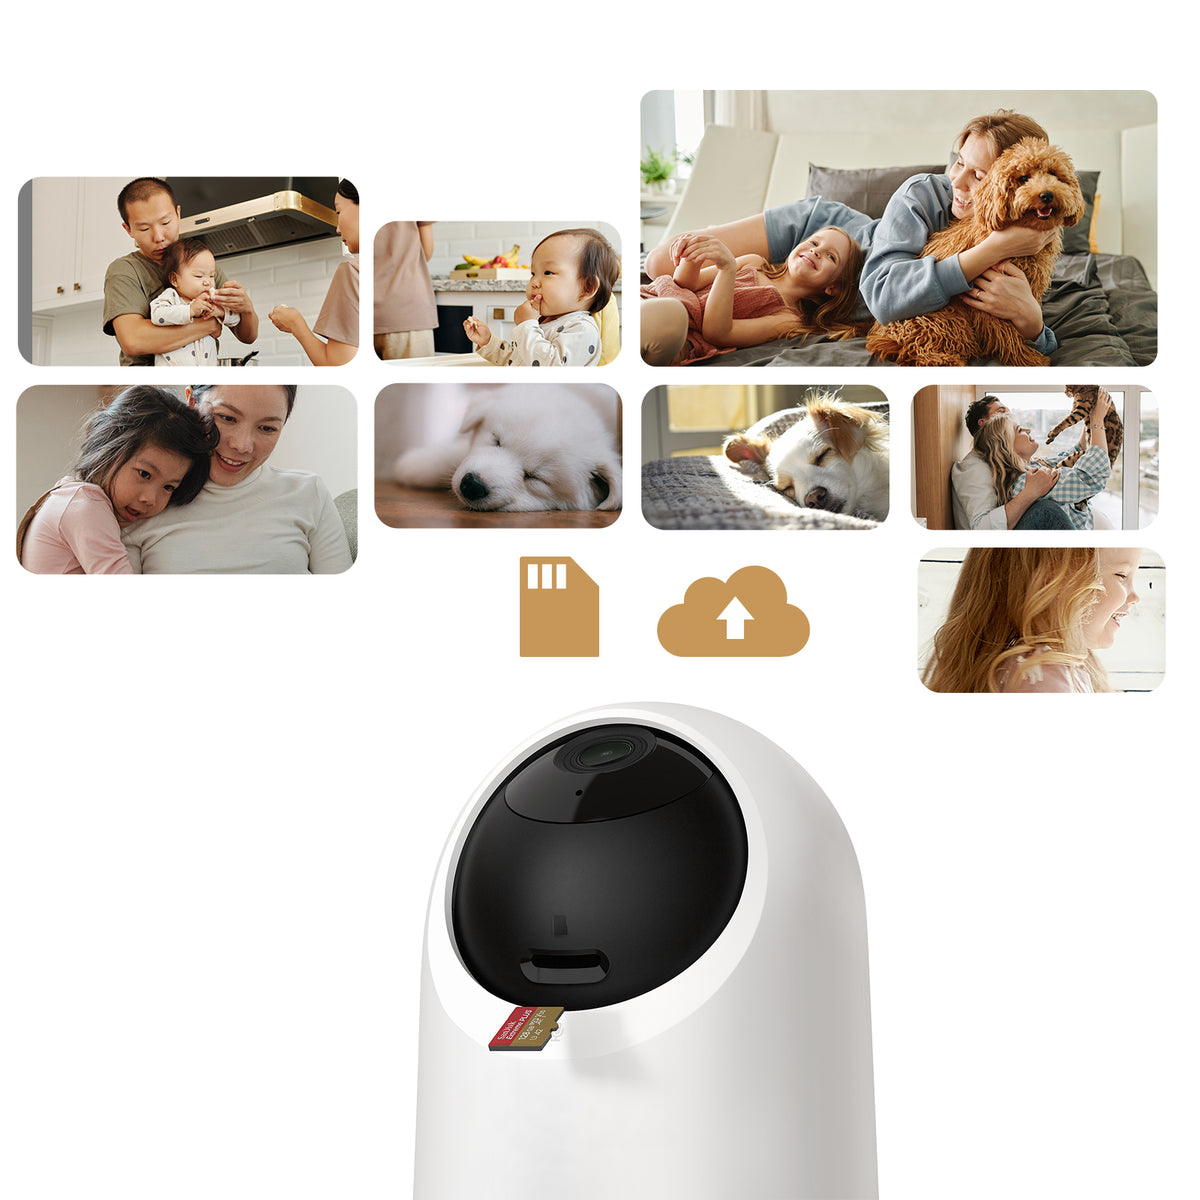 SwitchBot is the best security camera for home.